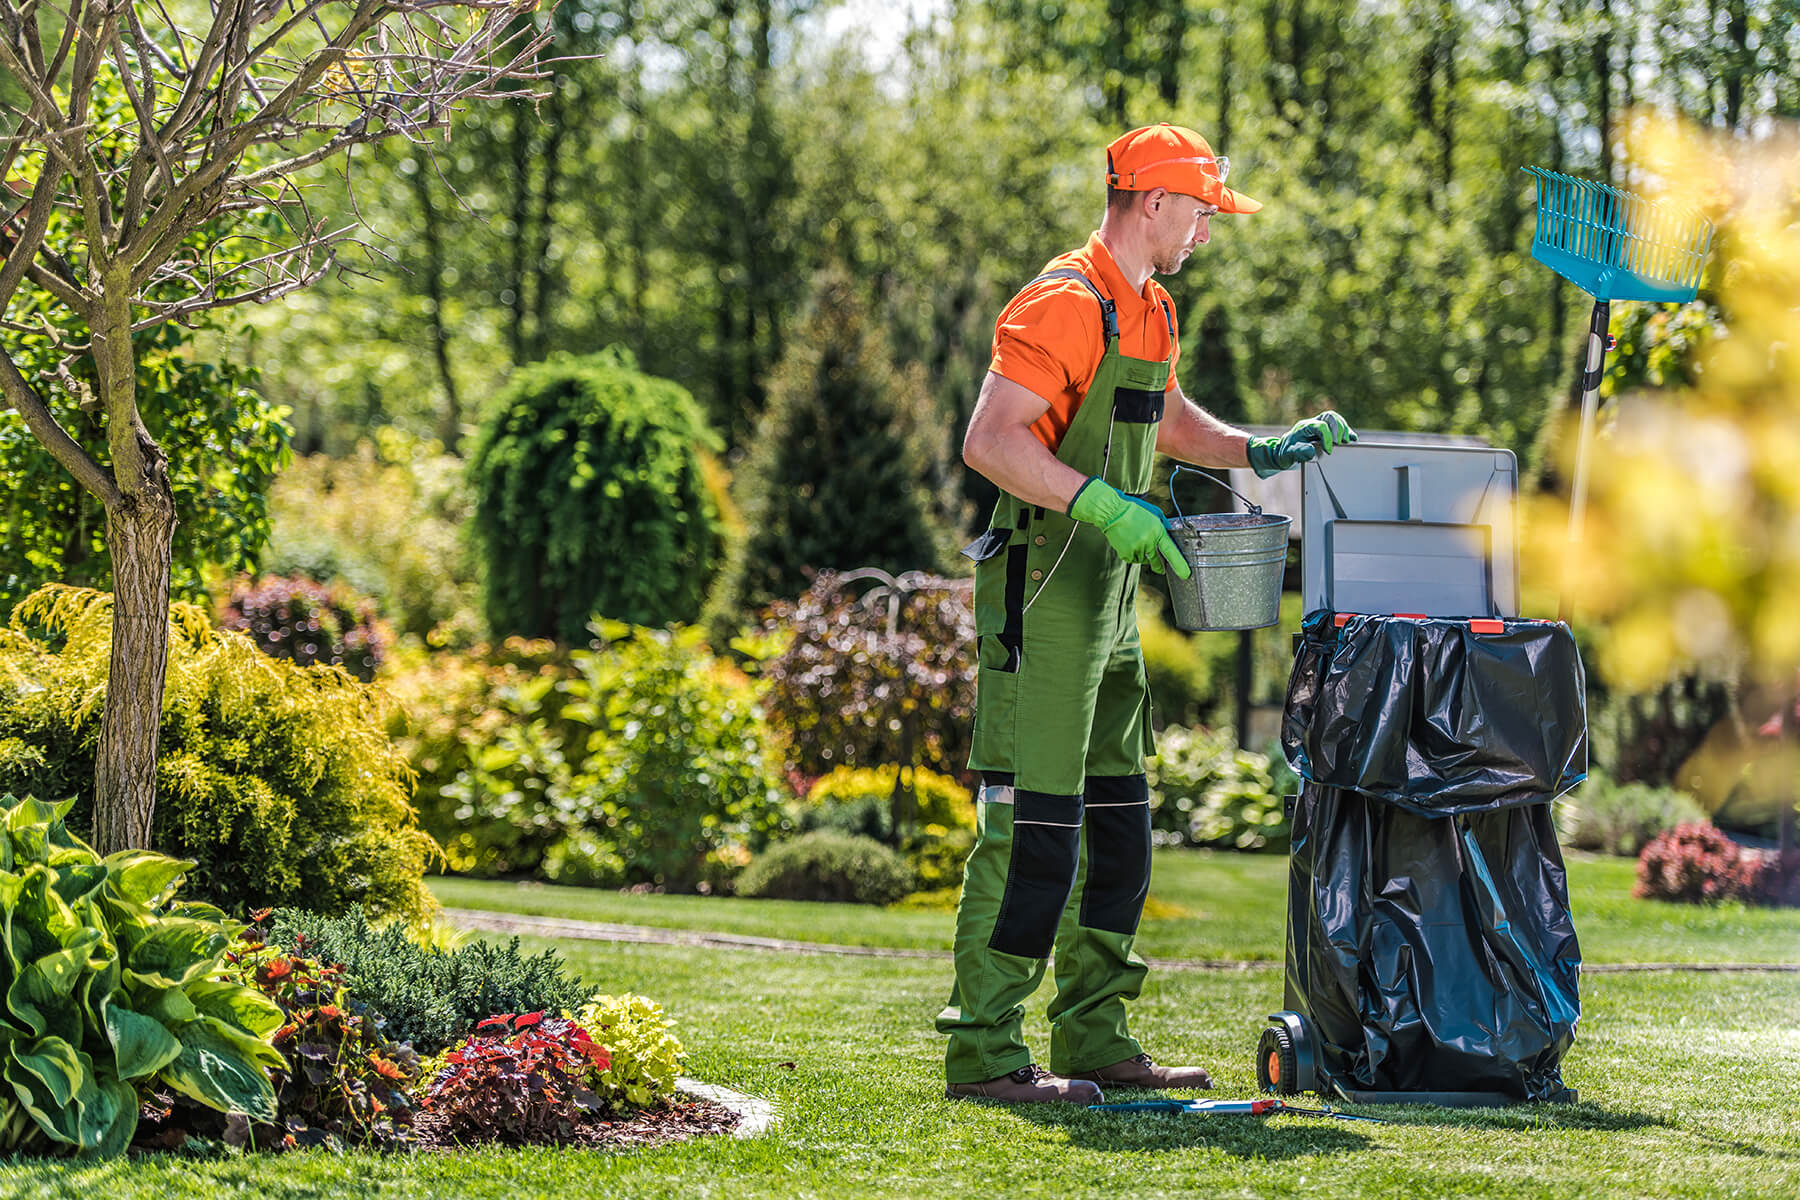 groundskeeper services, groundskeeping services near me